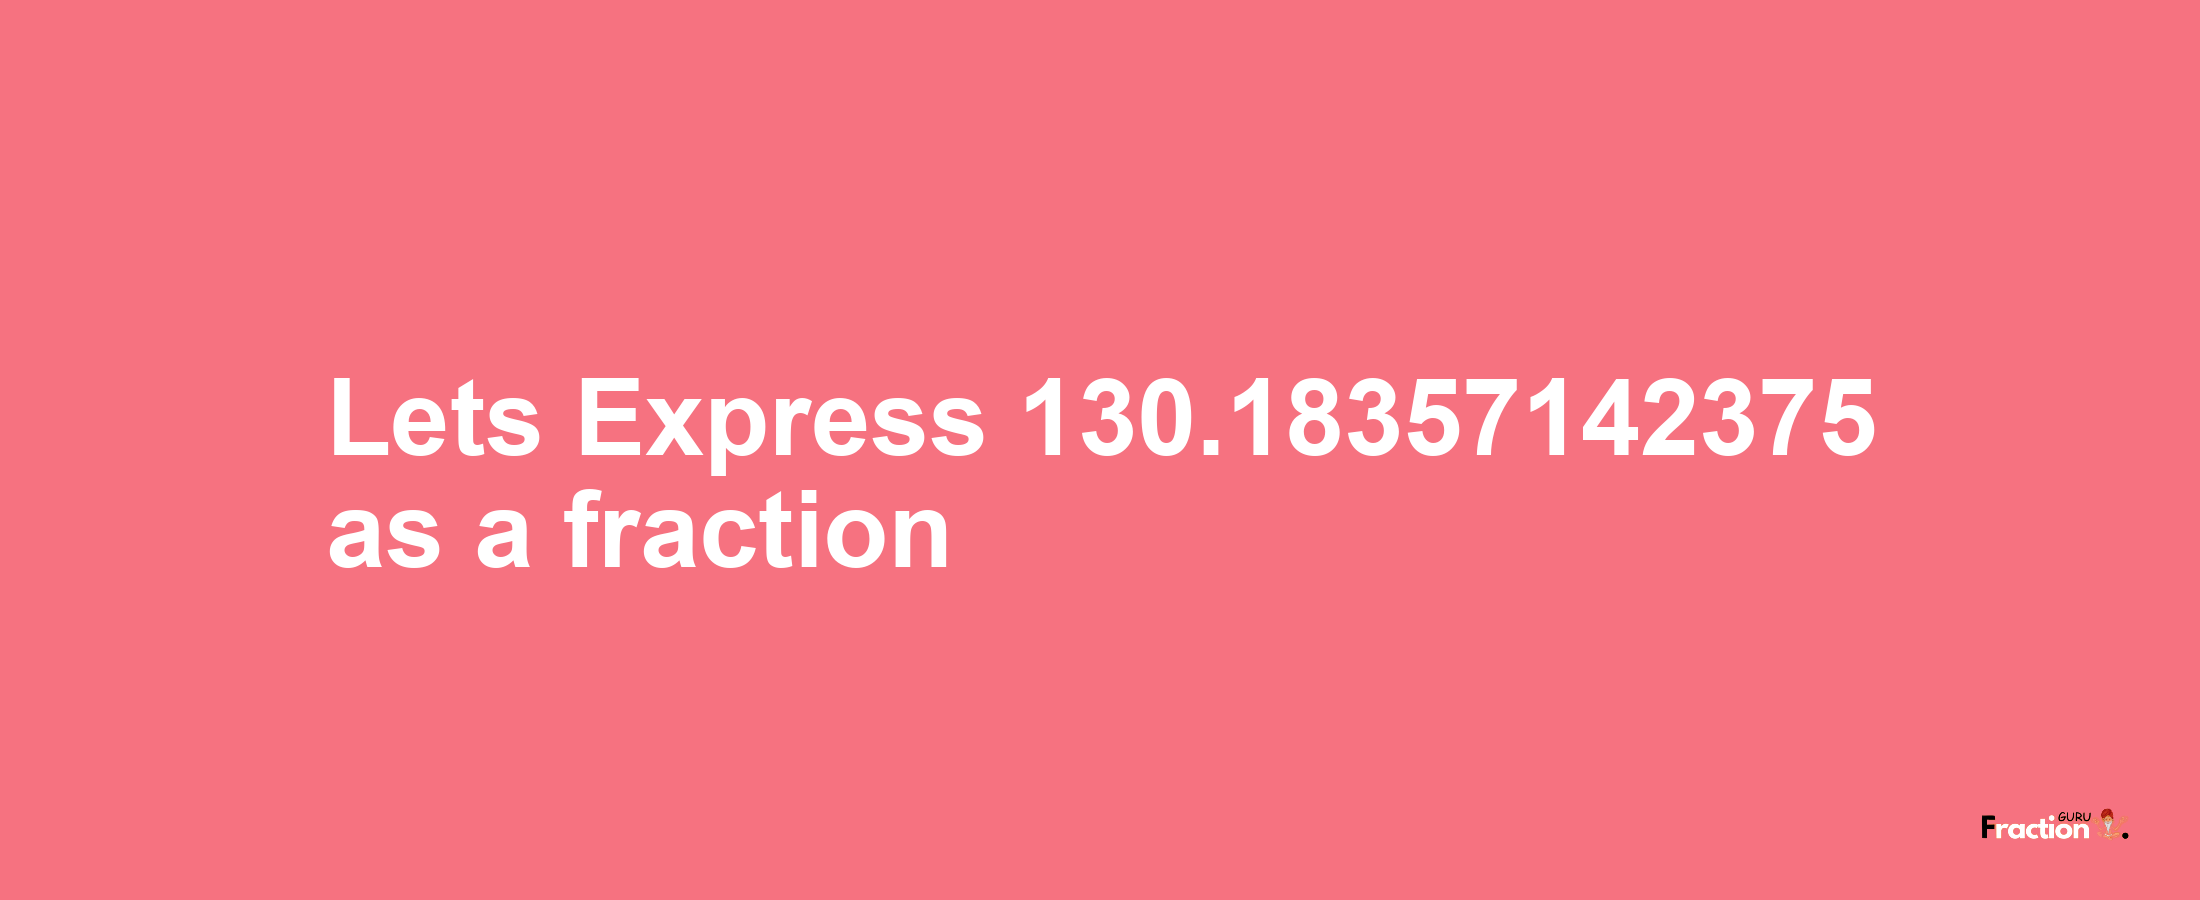 Lets Express 130.18357142375 as afraction